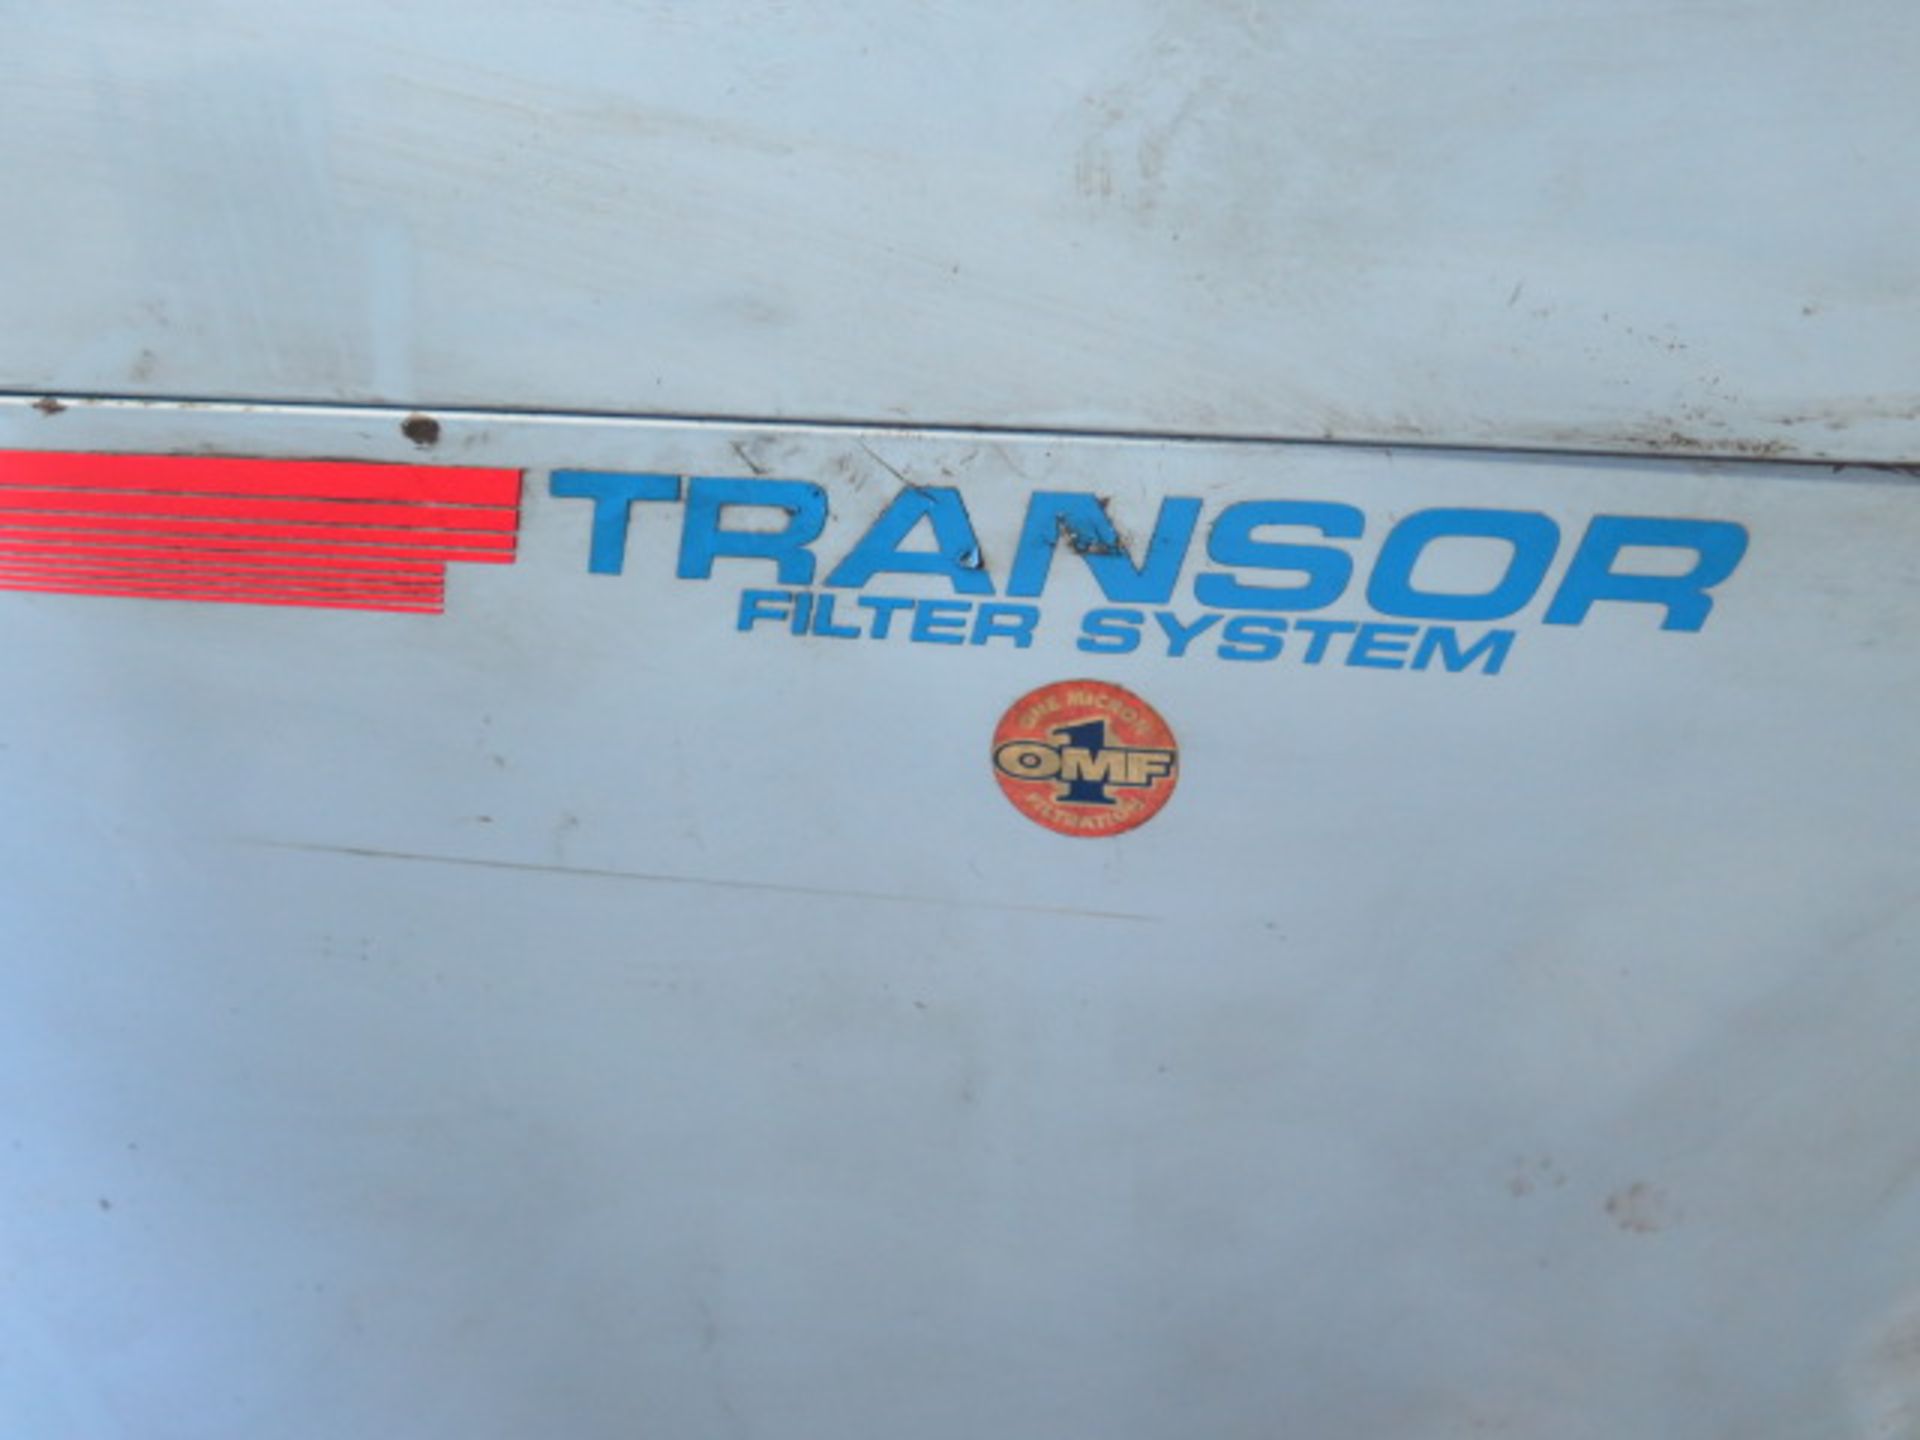 2007 Frigadon FWC-110-TRE Transor Filter System s/n 07243391 (Refrigeration and Micron, SOLD AS IS - Image 3 of 8